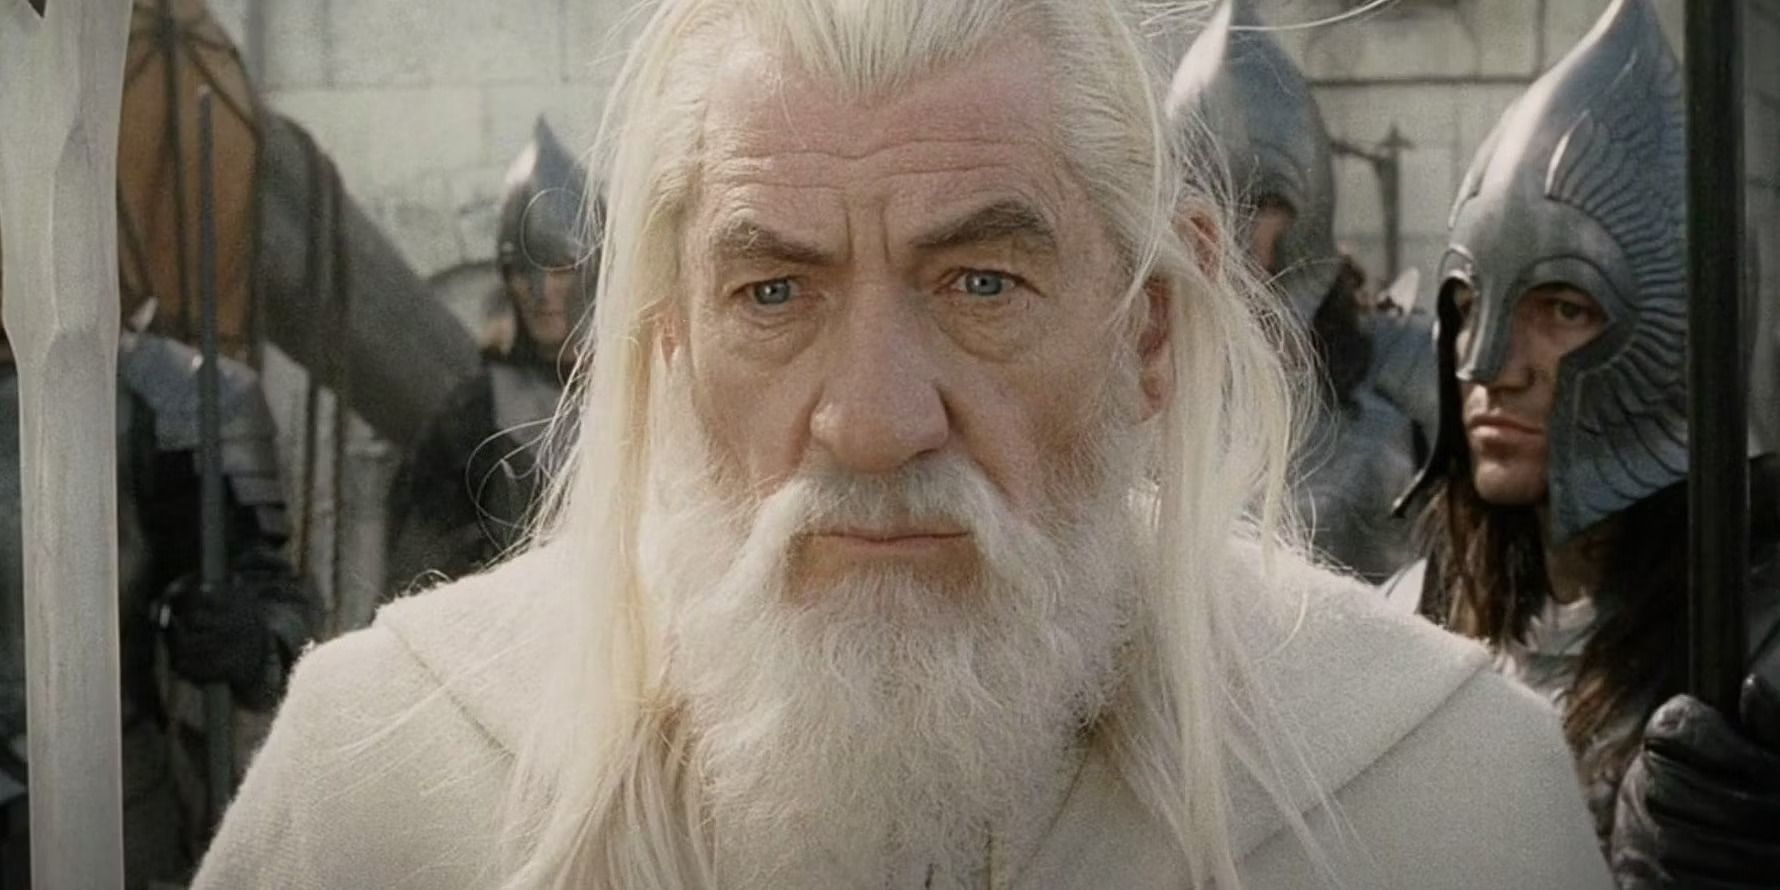 Gandalf the White standing in front of soldiers in The Lord of the Rings.